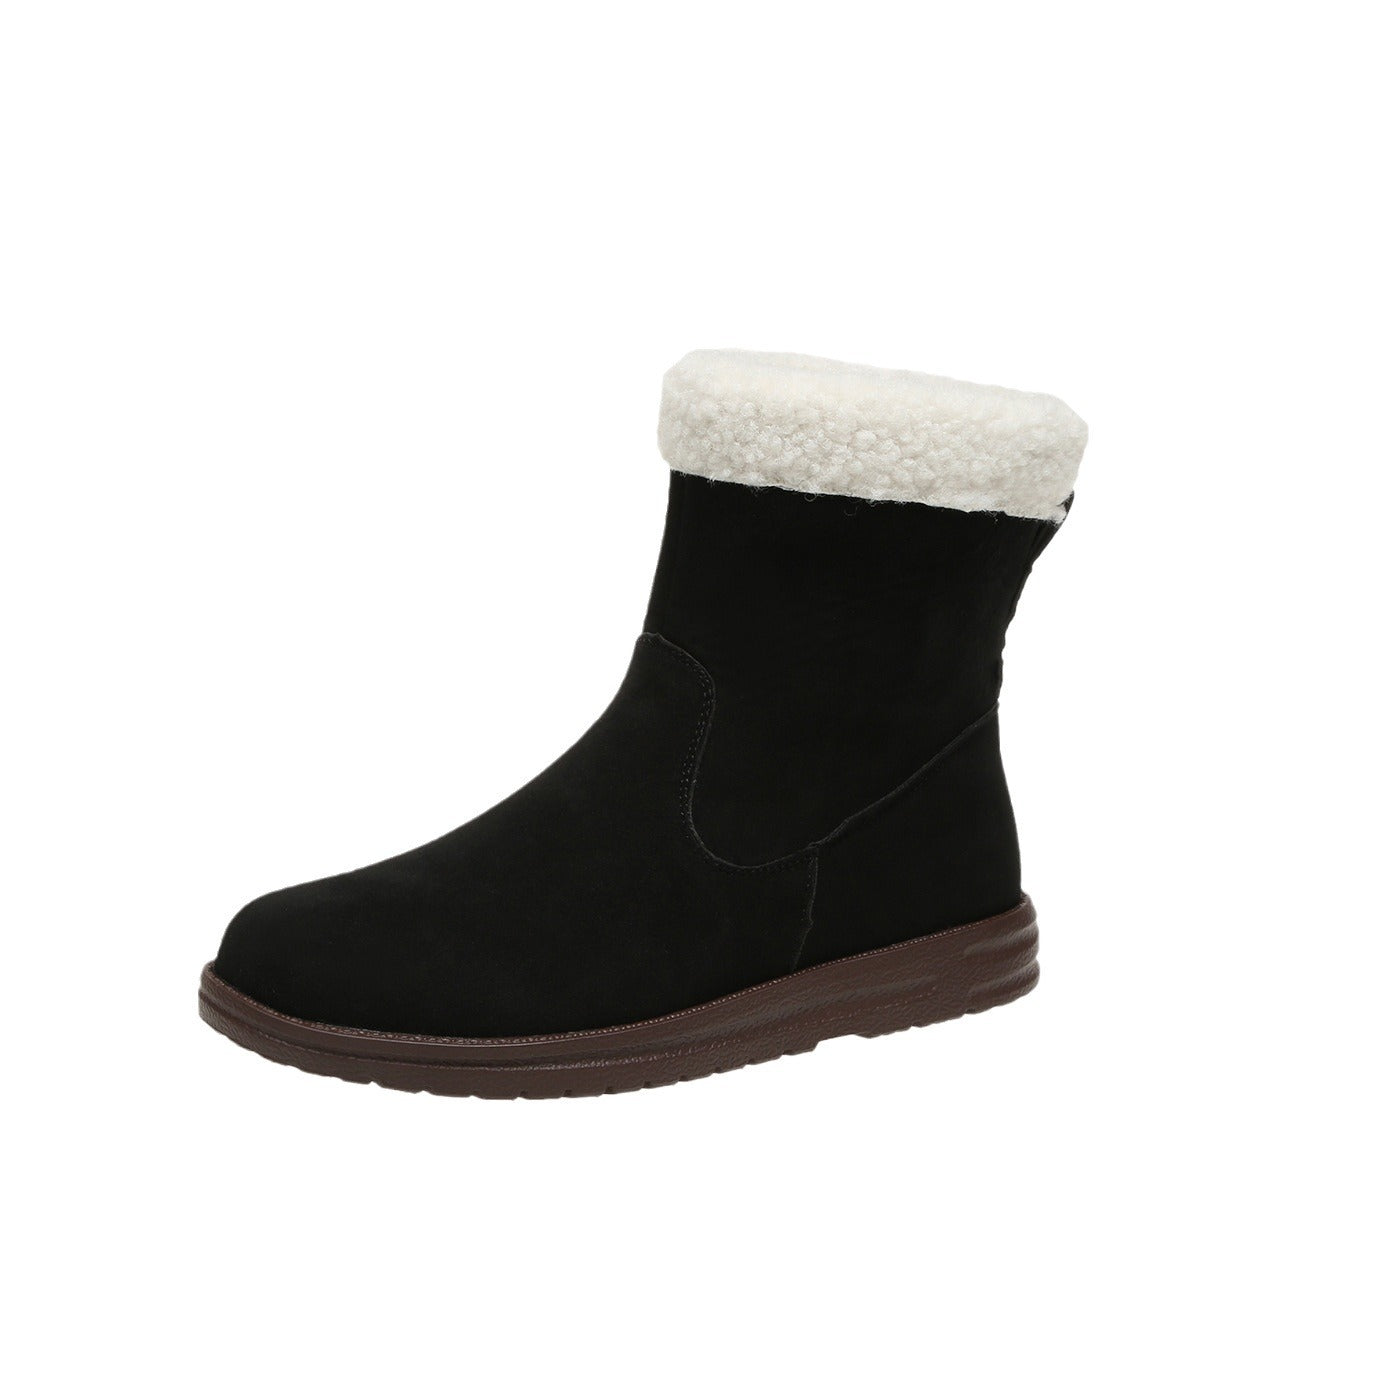 Winter Snow Boots New Fashion Lamb Thickened Warm Fleece Short Boots With Side Zpipper Design Solid Shoes For Women